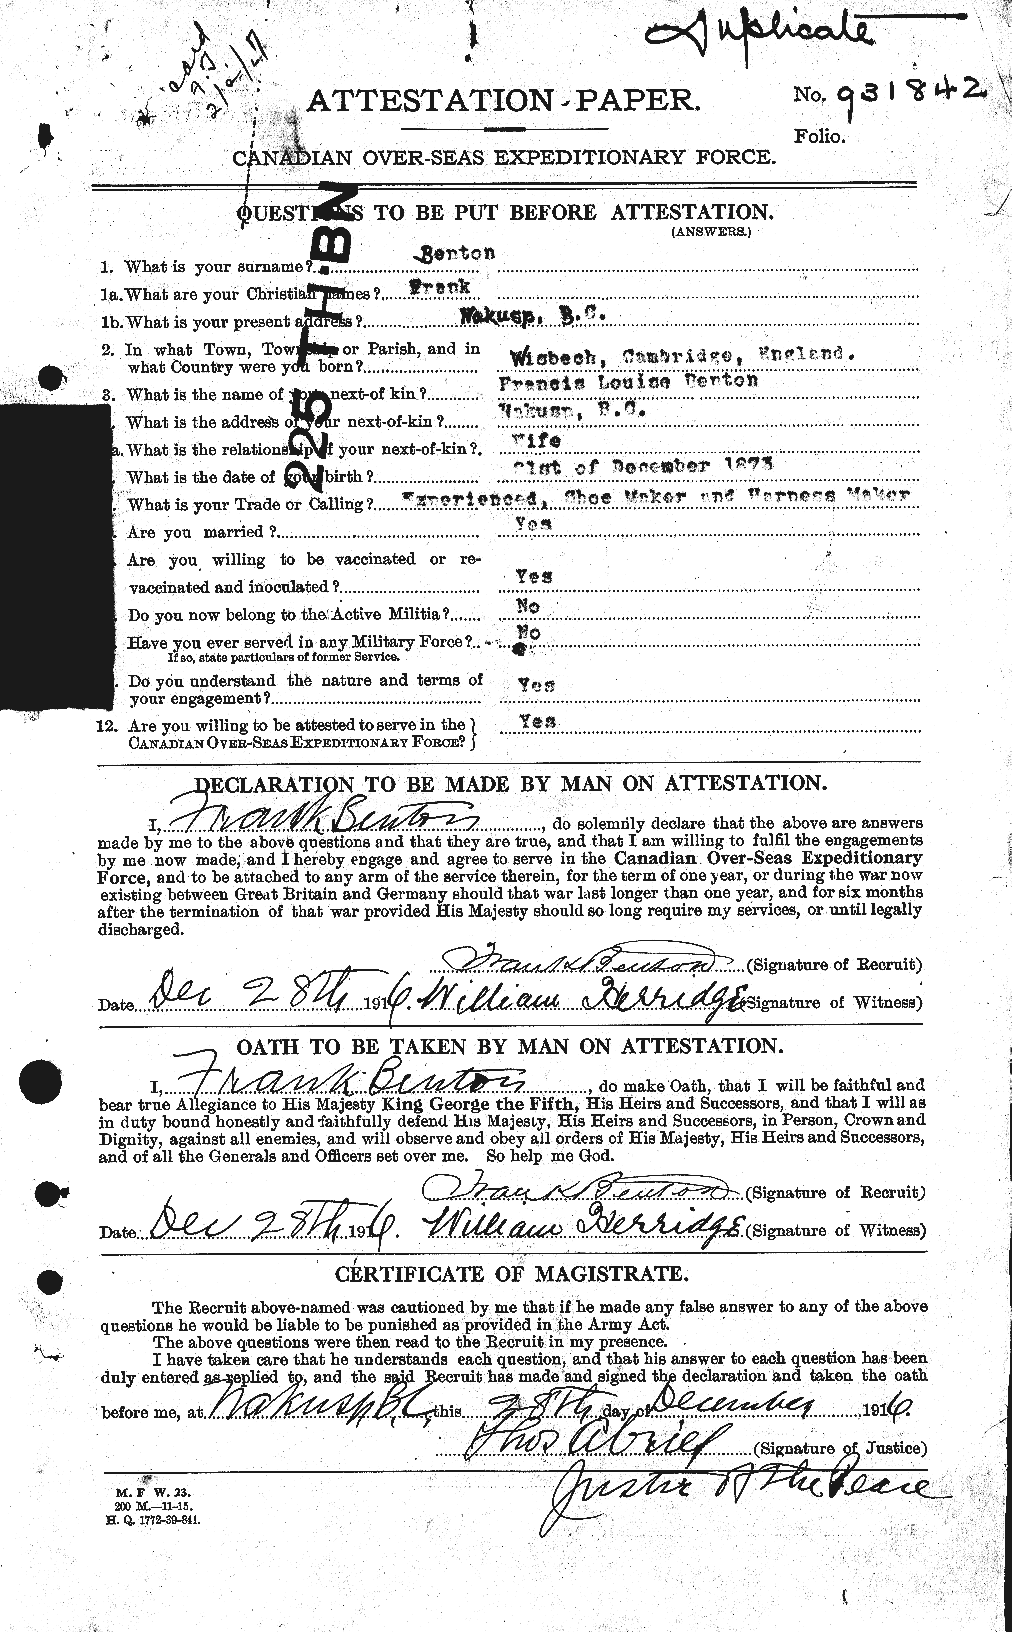 Personnel Records of the First World War - CEF 237810a